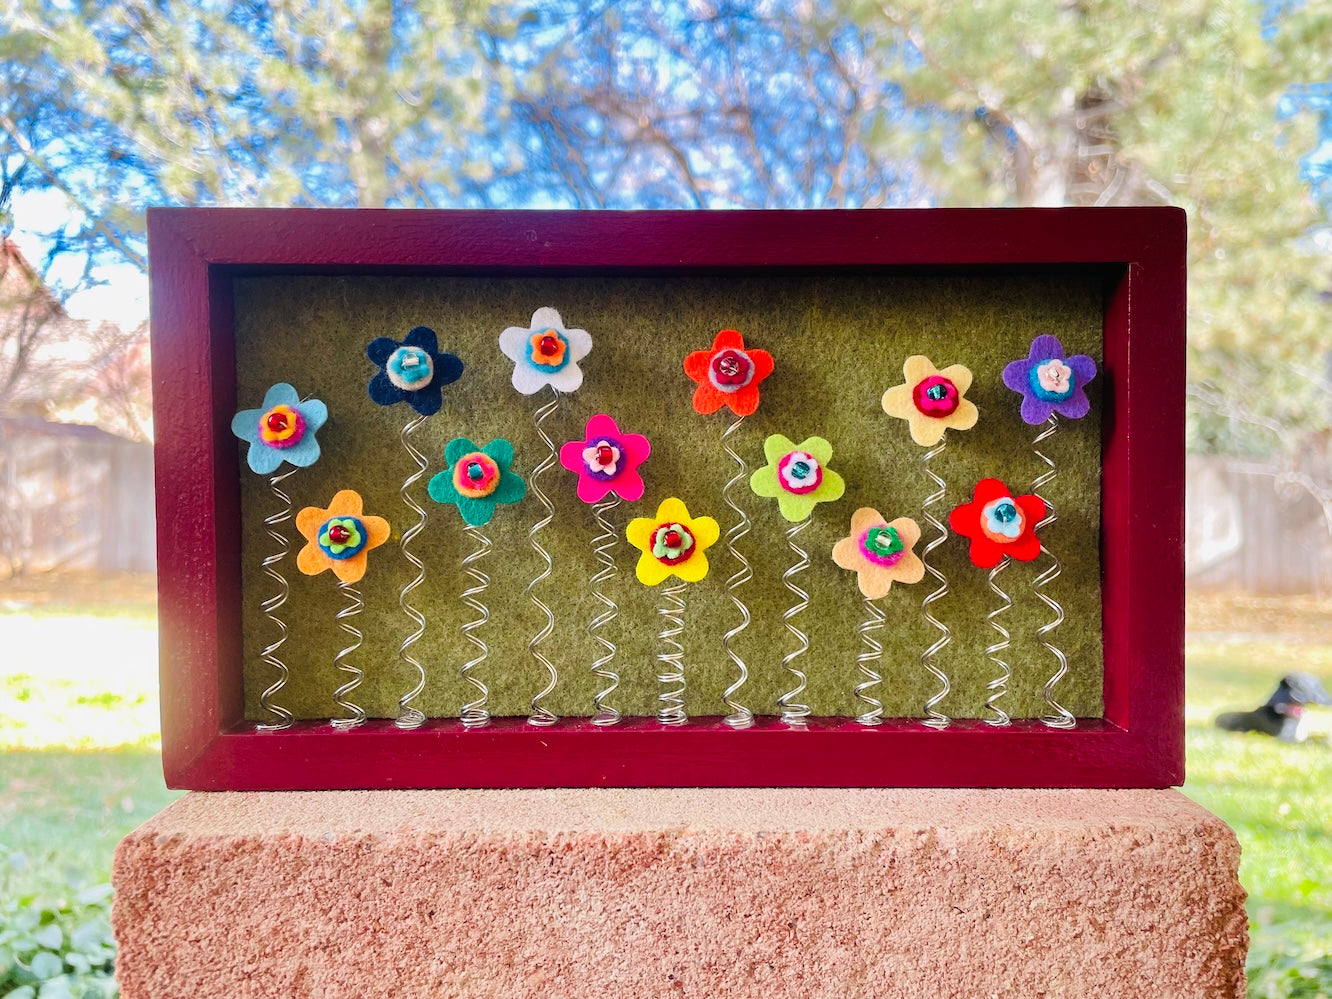 Dark Red Shadow Box with 13 Multi-Colored Felt Flowers